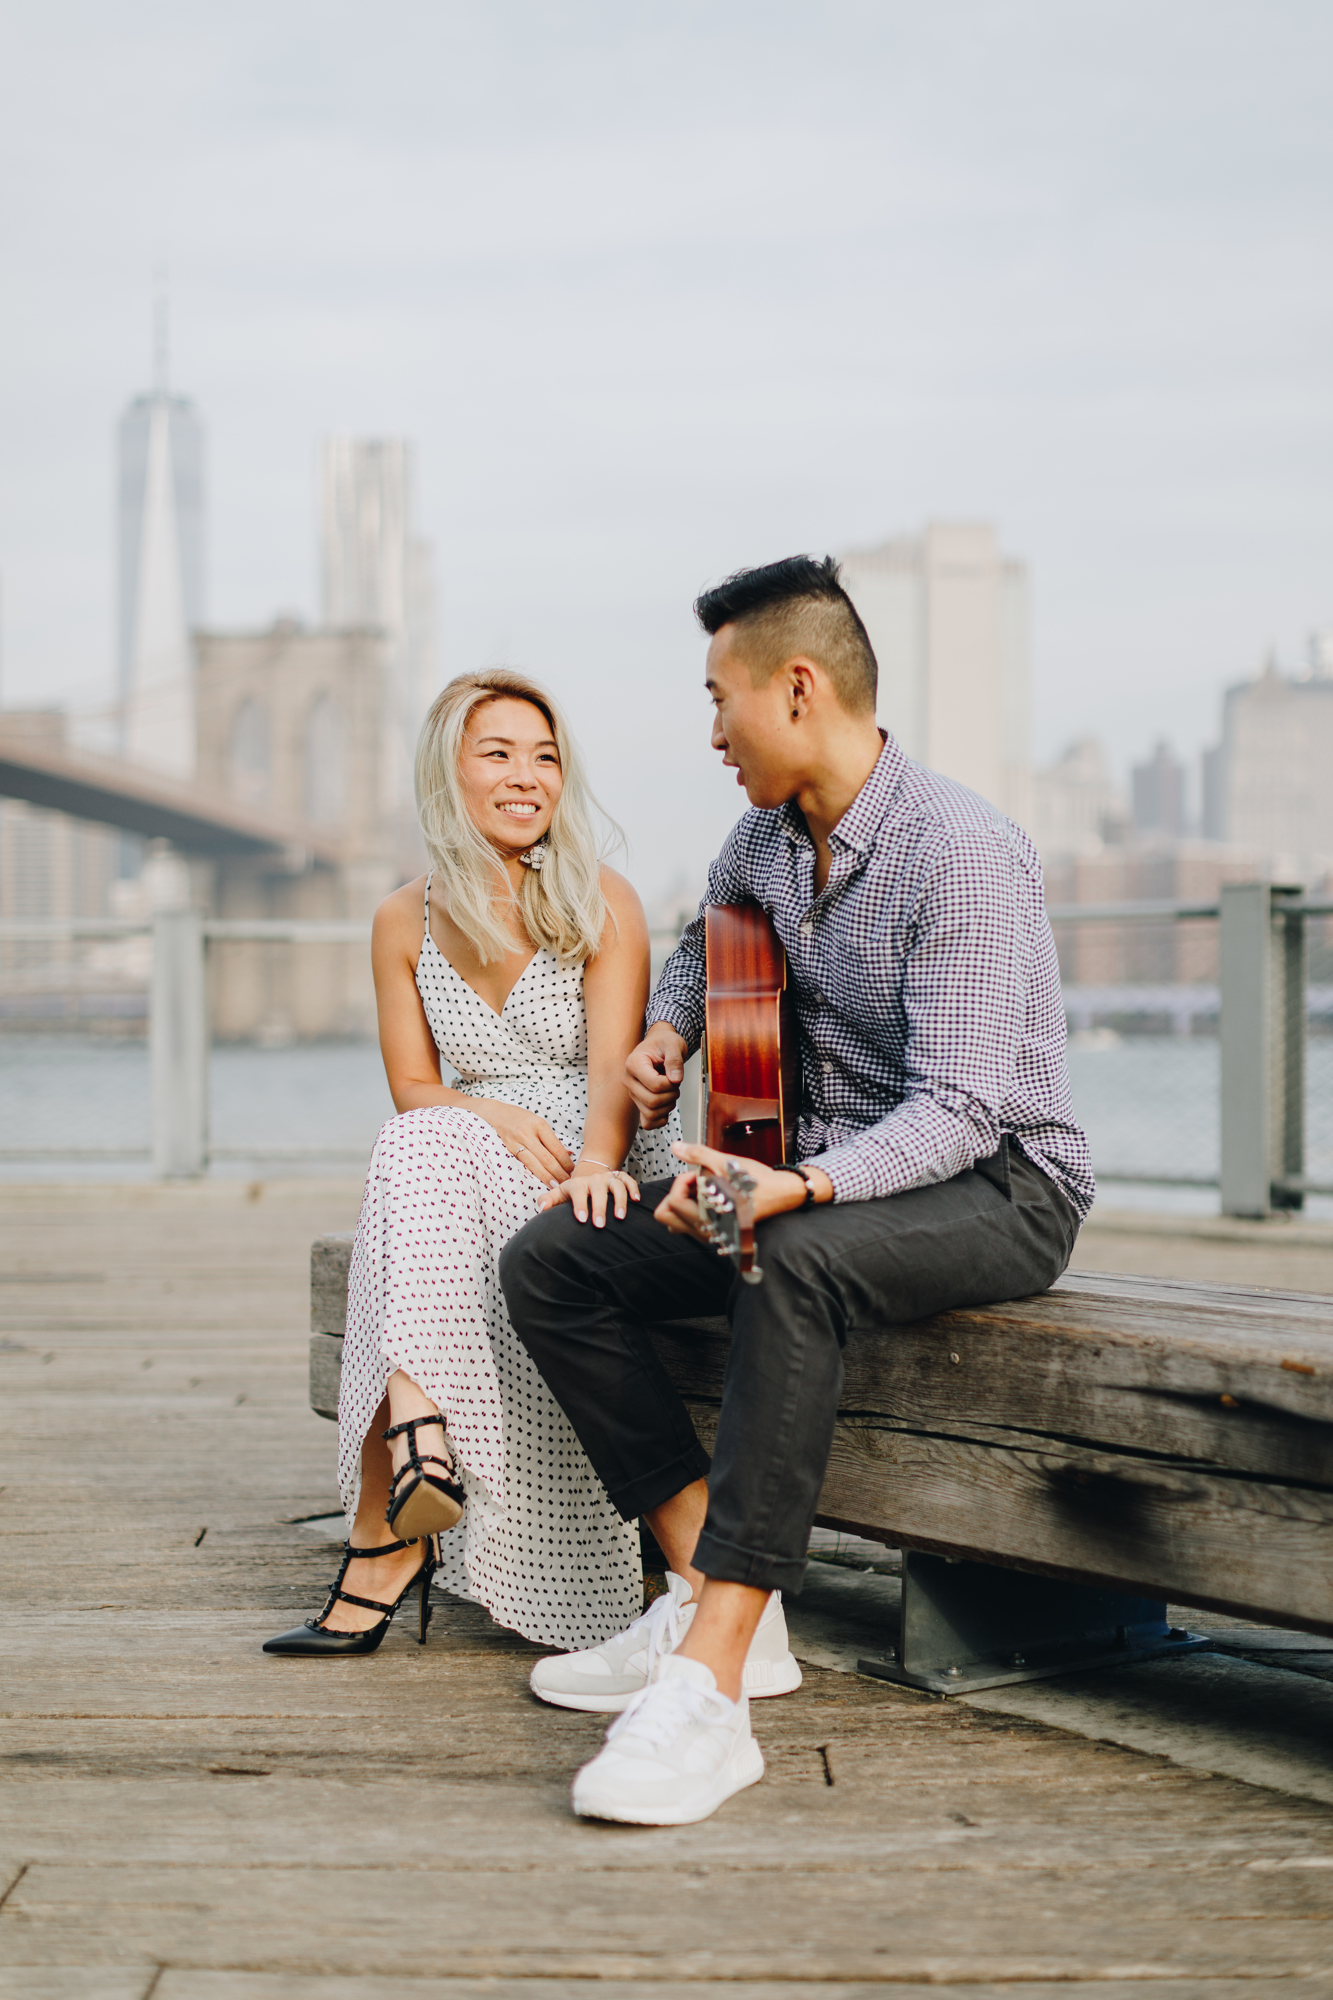 Charming Fall Engagement Photos in DUMBO